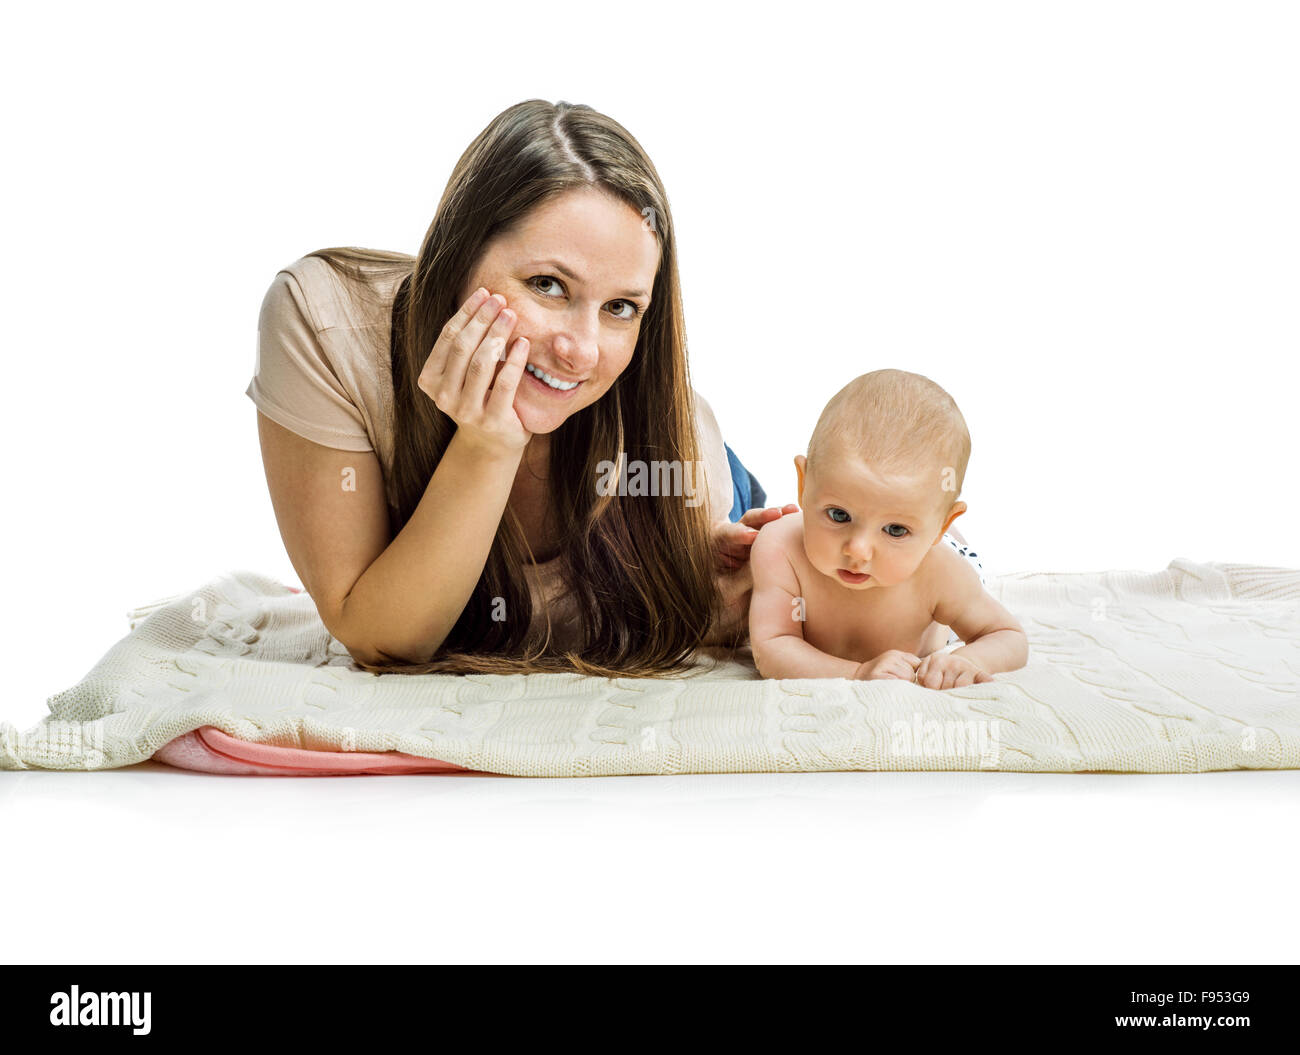 Smiling mother lying with her baby on a floor isolated on white background Stock Photo